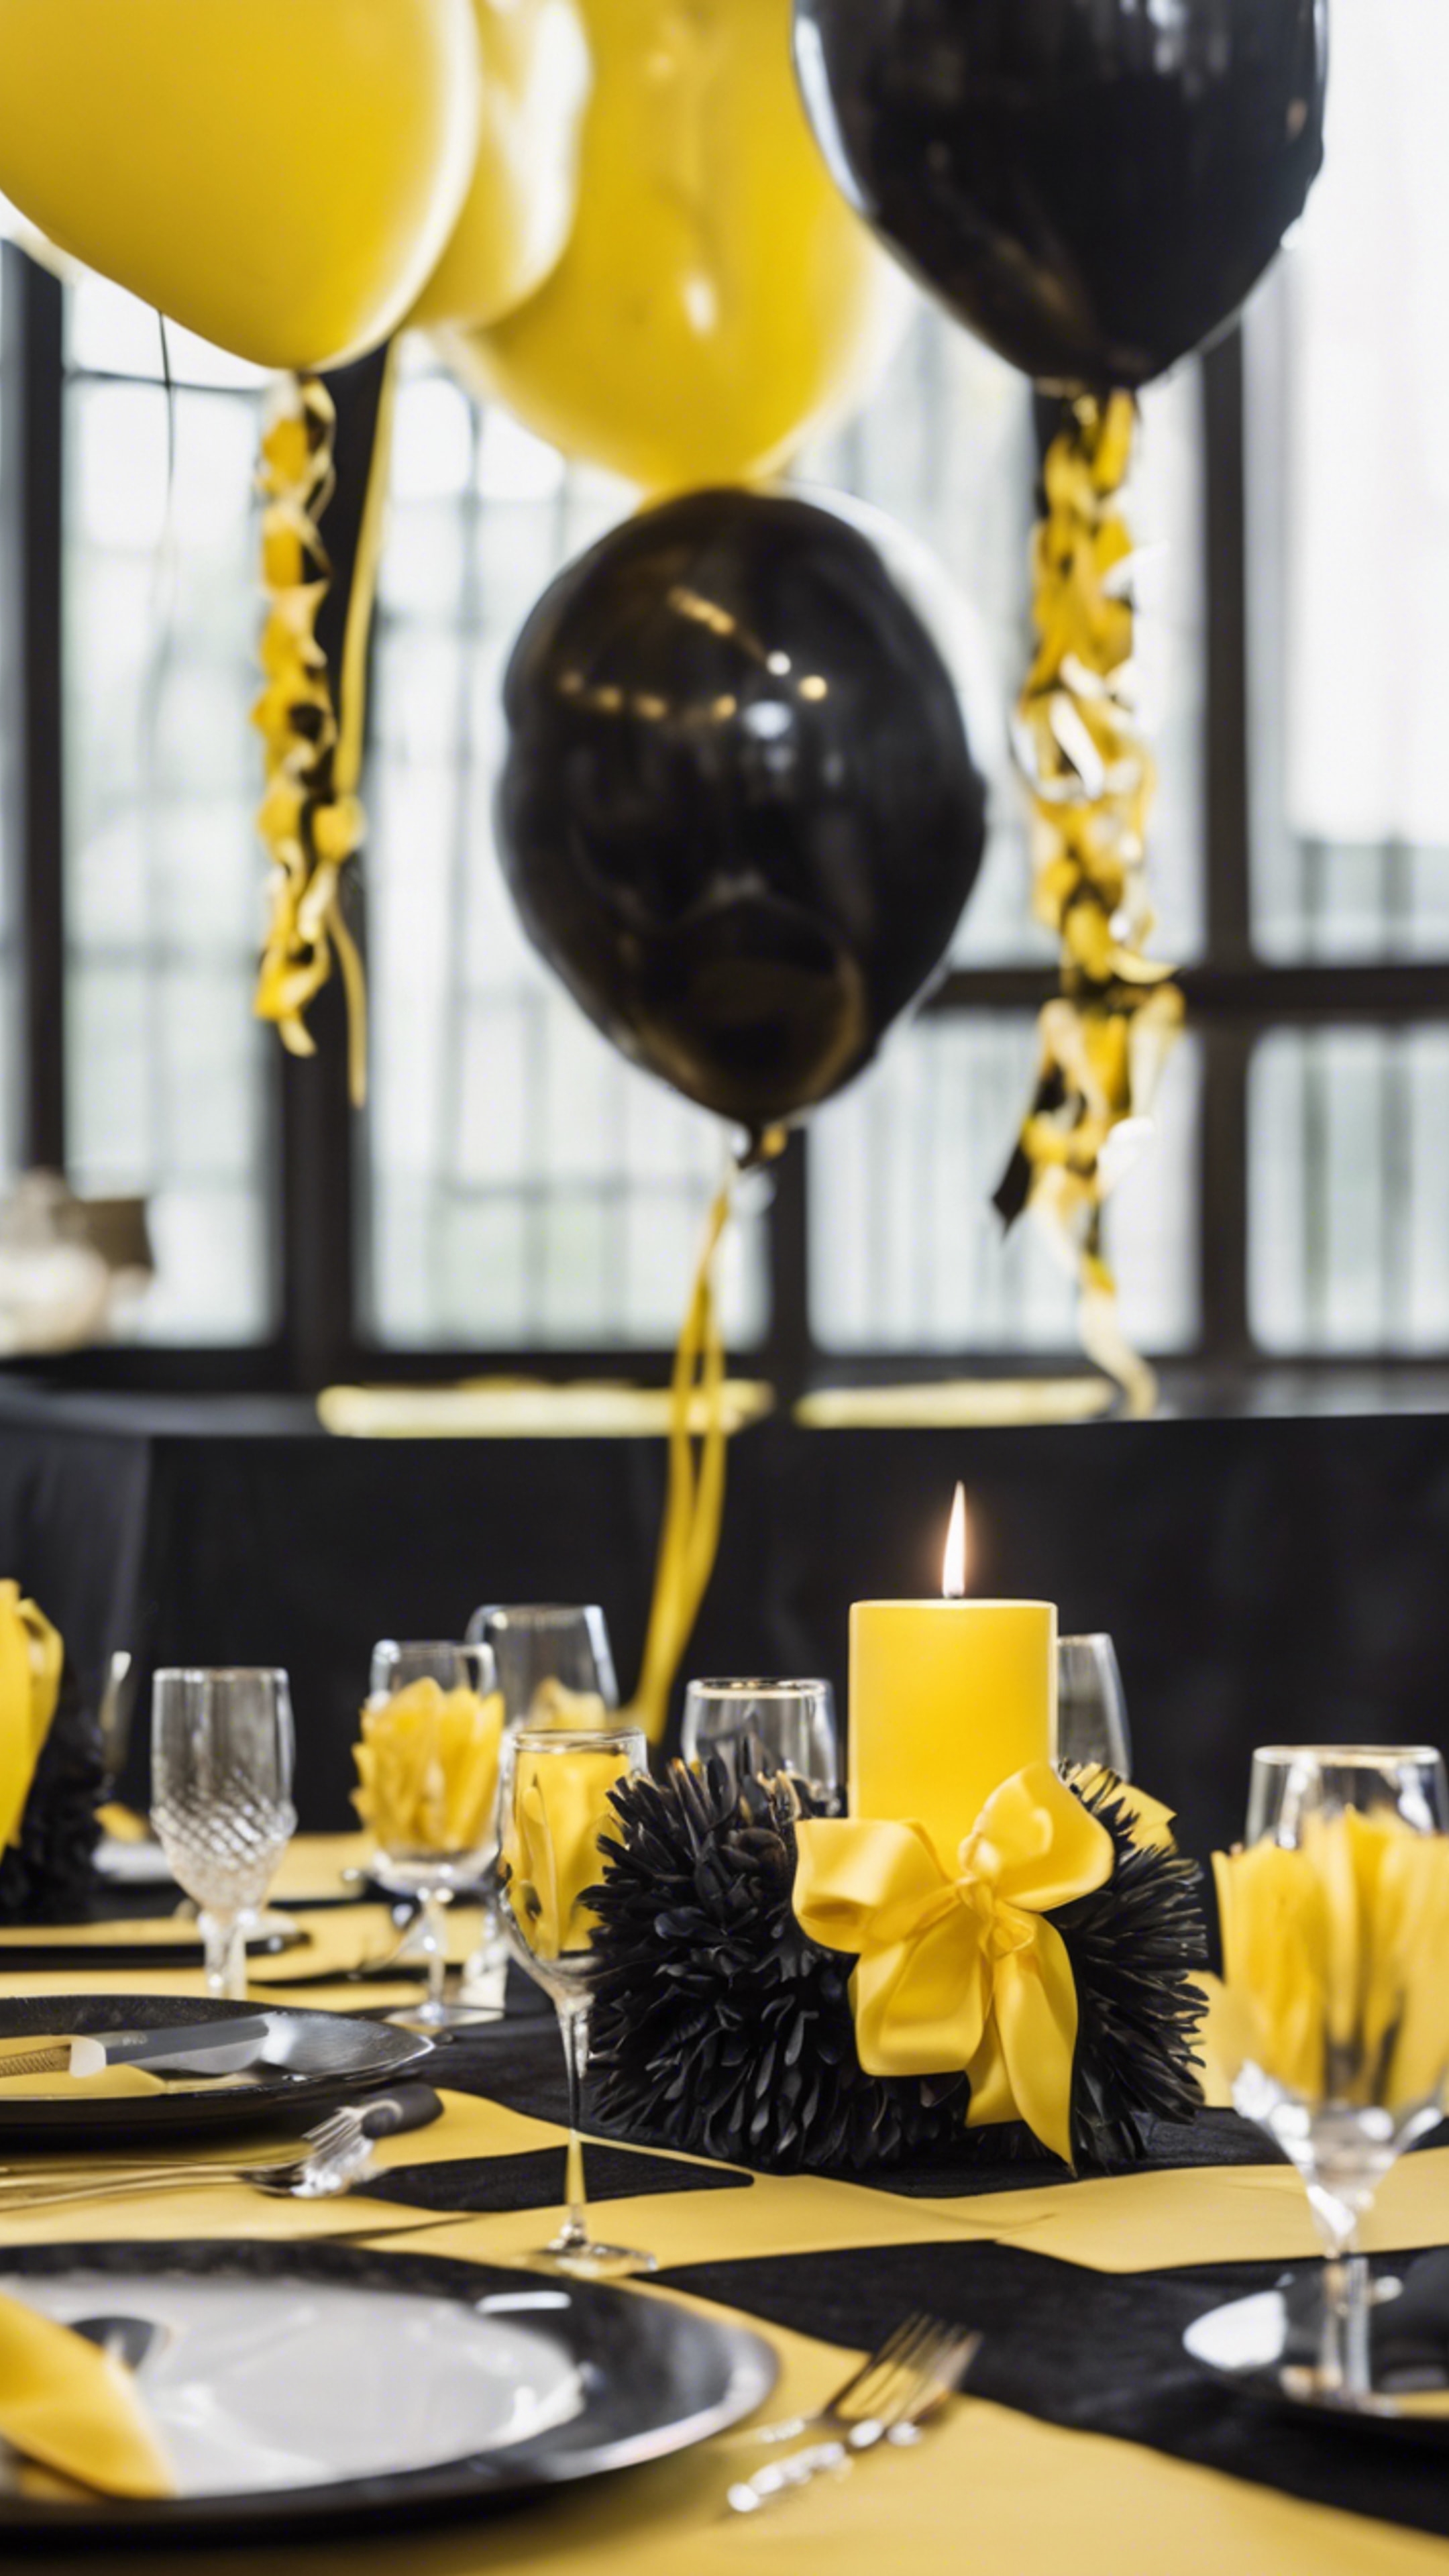 A table set with black and yellow themed party decorations for a birthday celebration.壁紙[799426b85ea14846a022]